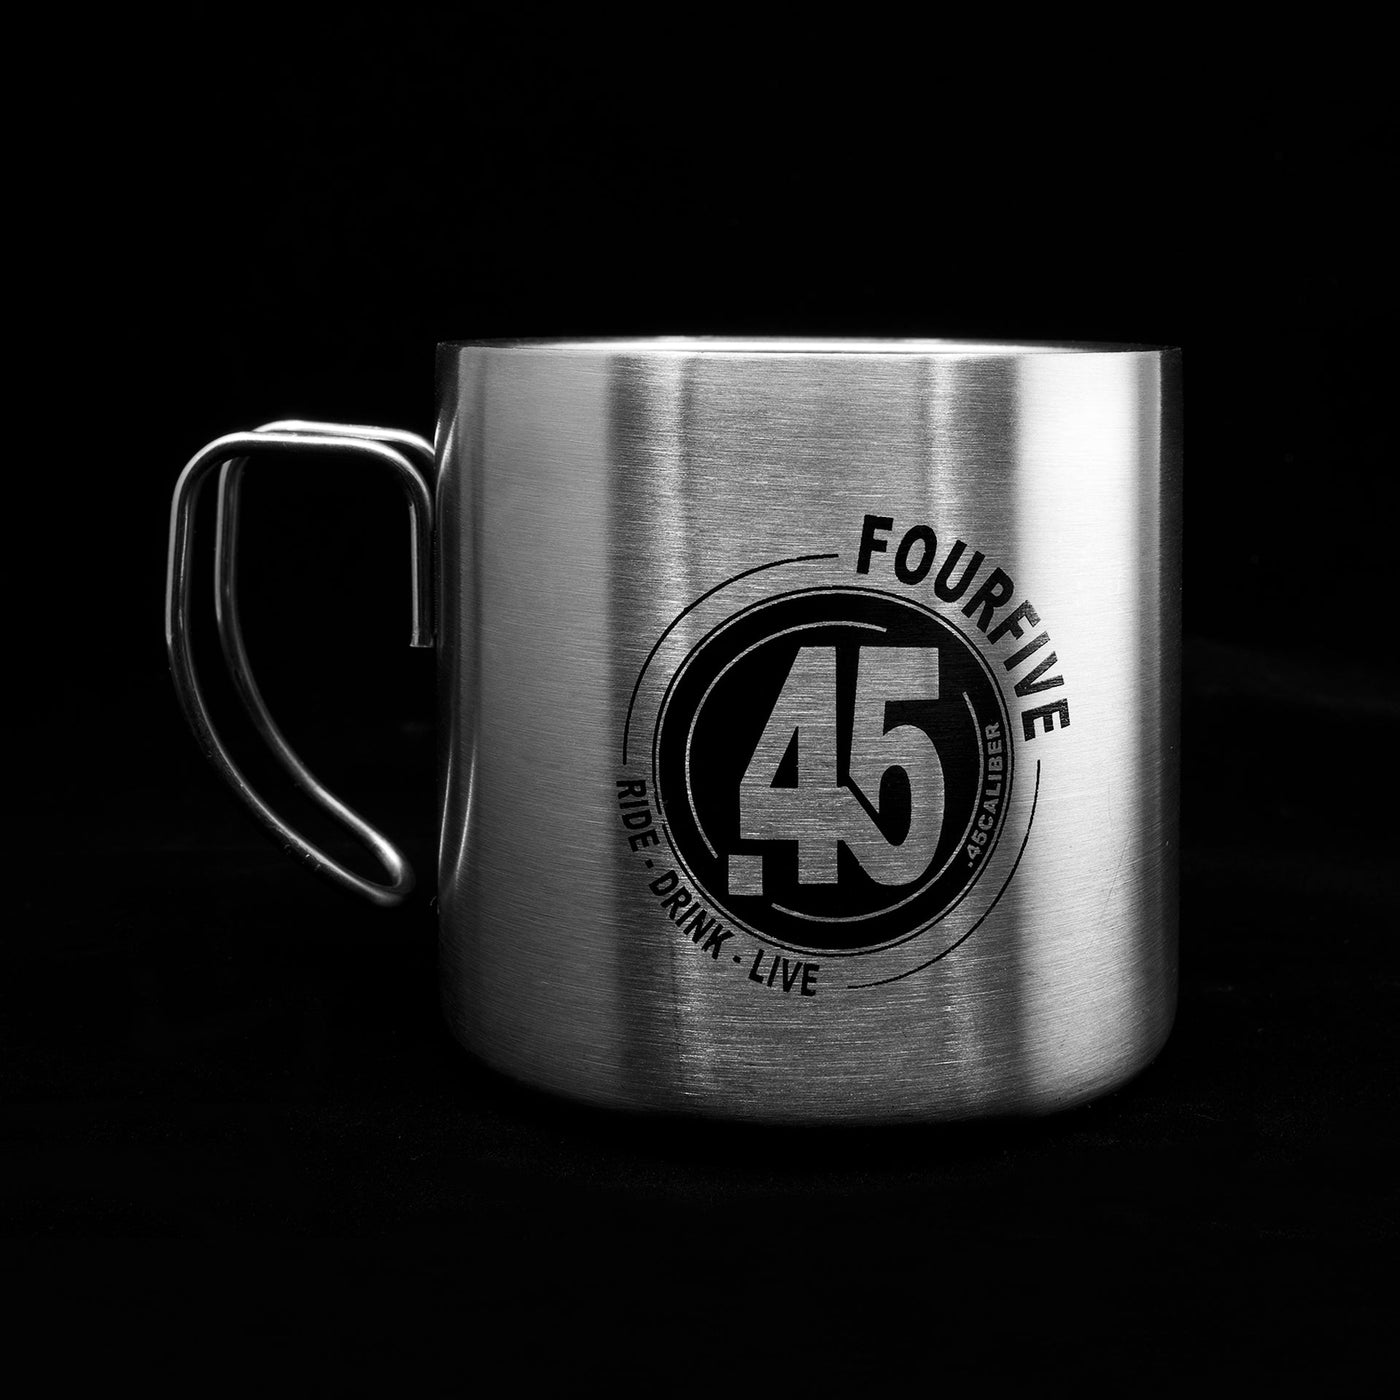 A Fourfive 45 ACP coffee mug in double walled stainless steel construction with a Fourfive 45 logo printed on its front facing straight with a black background.